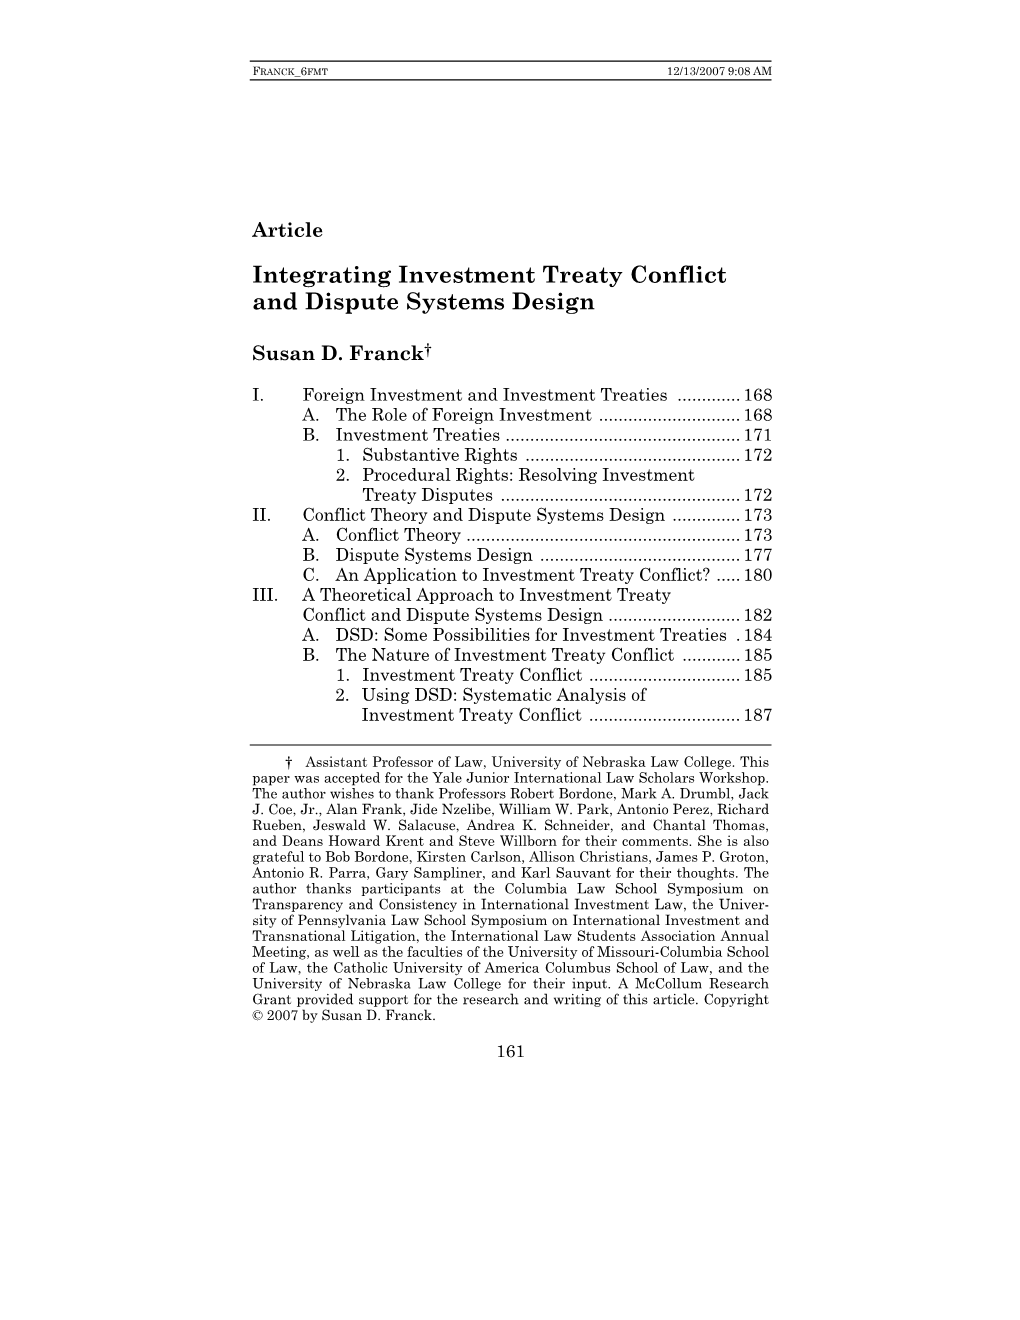 Integrating Investment Treaty Conflict and Dispute Systems Design